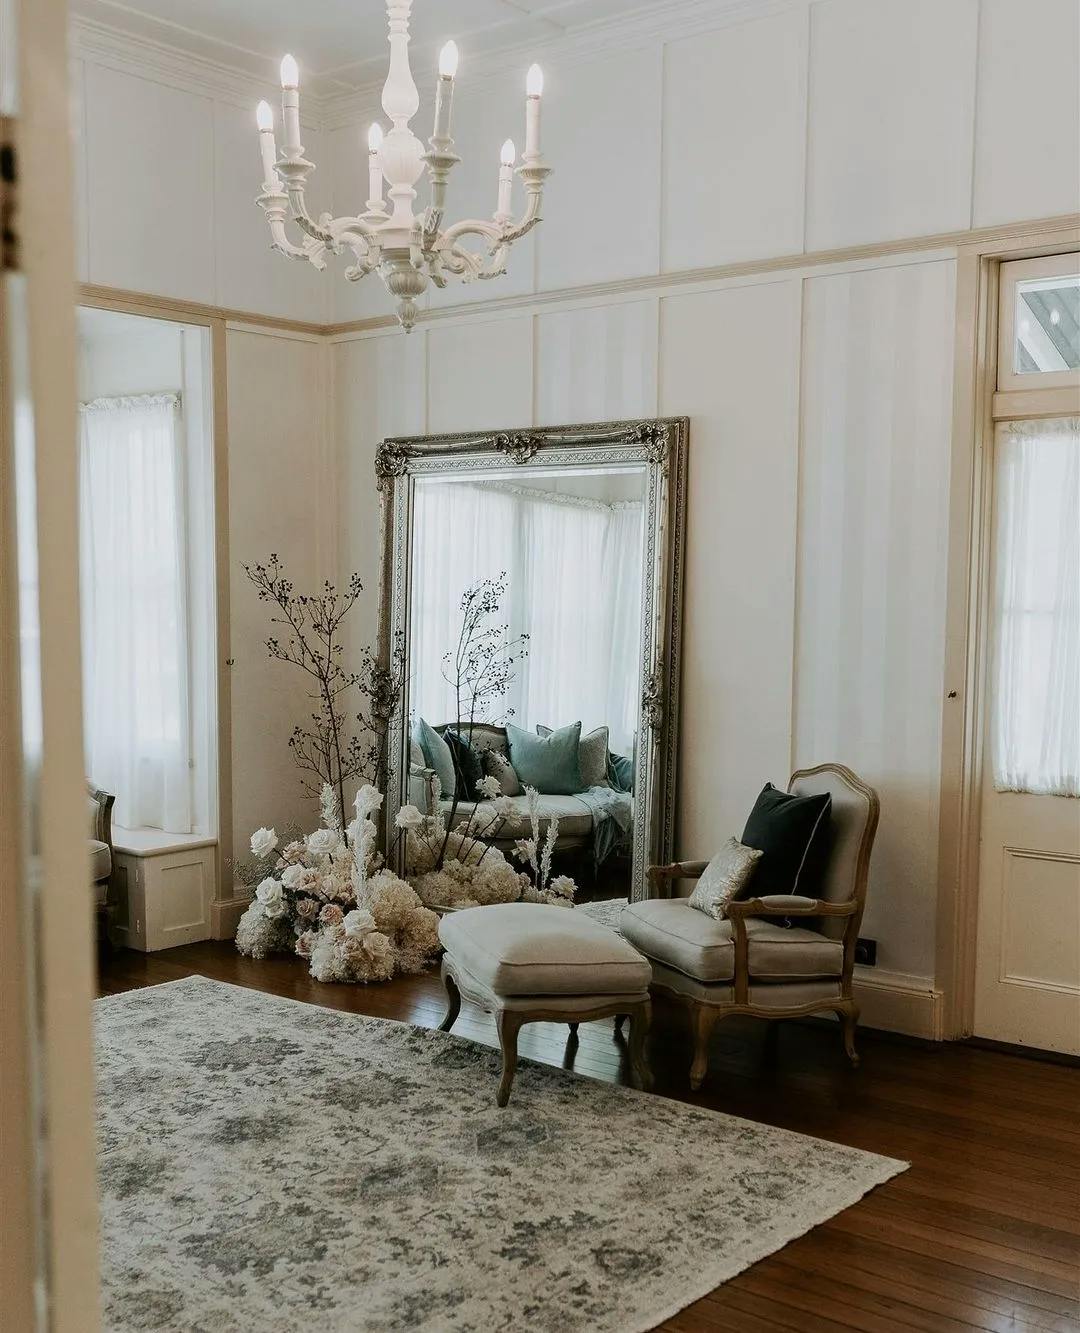 A bright, elegant room featuring a large ornate mirror, flowers arranged at its base, and a white chandelier hanging from the ceiling. An upholstered armchair with an ottoman is positioned in front of the mirror on a plush rug, with large windows providing natural light.